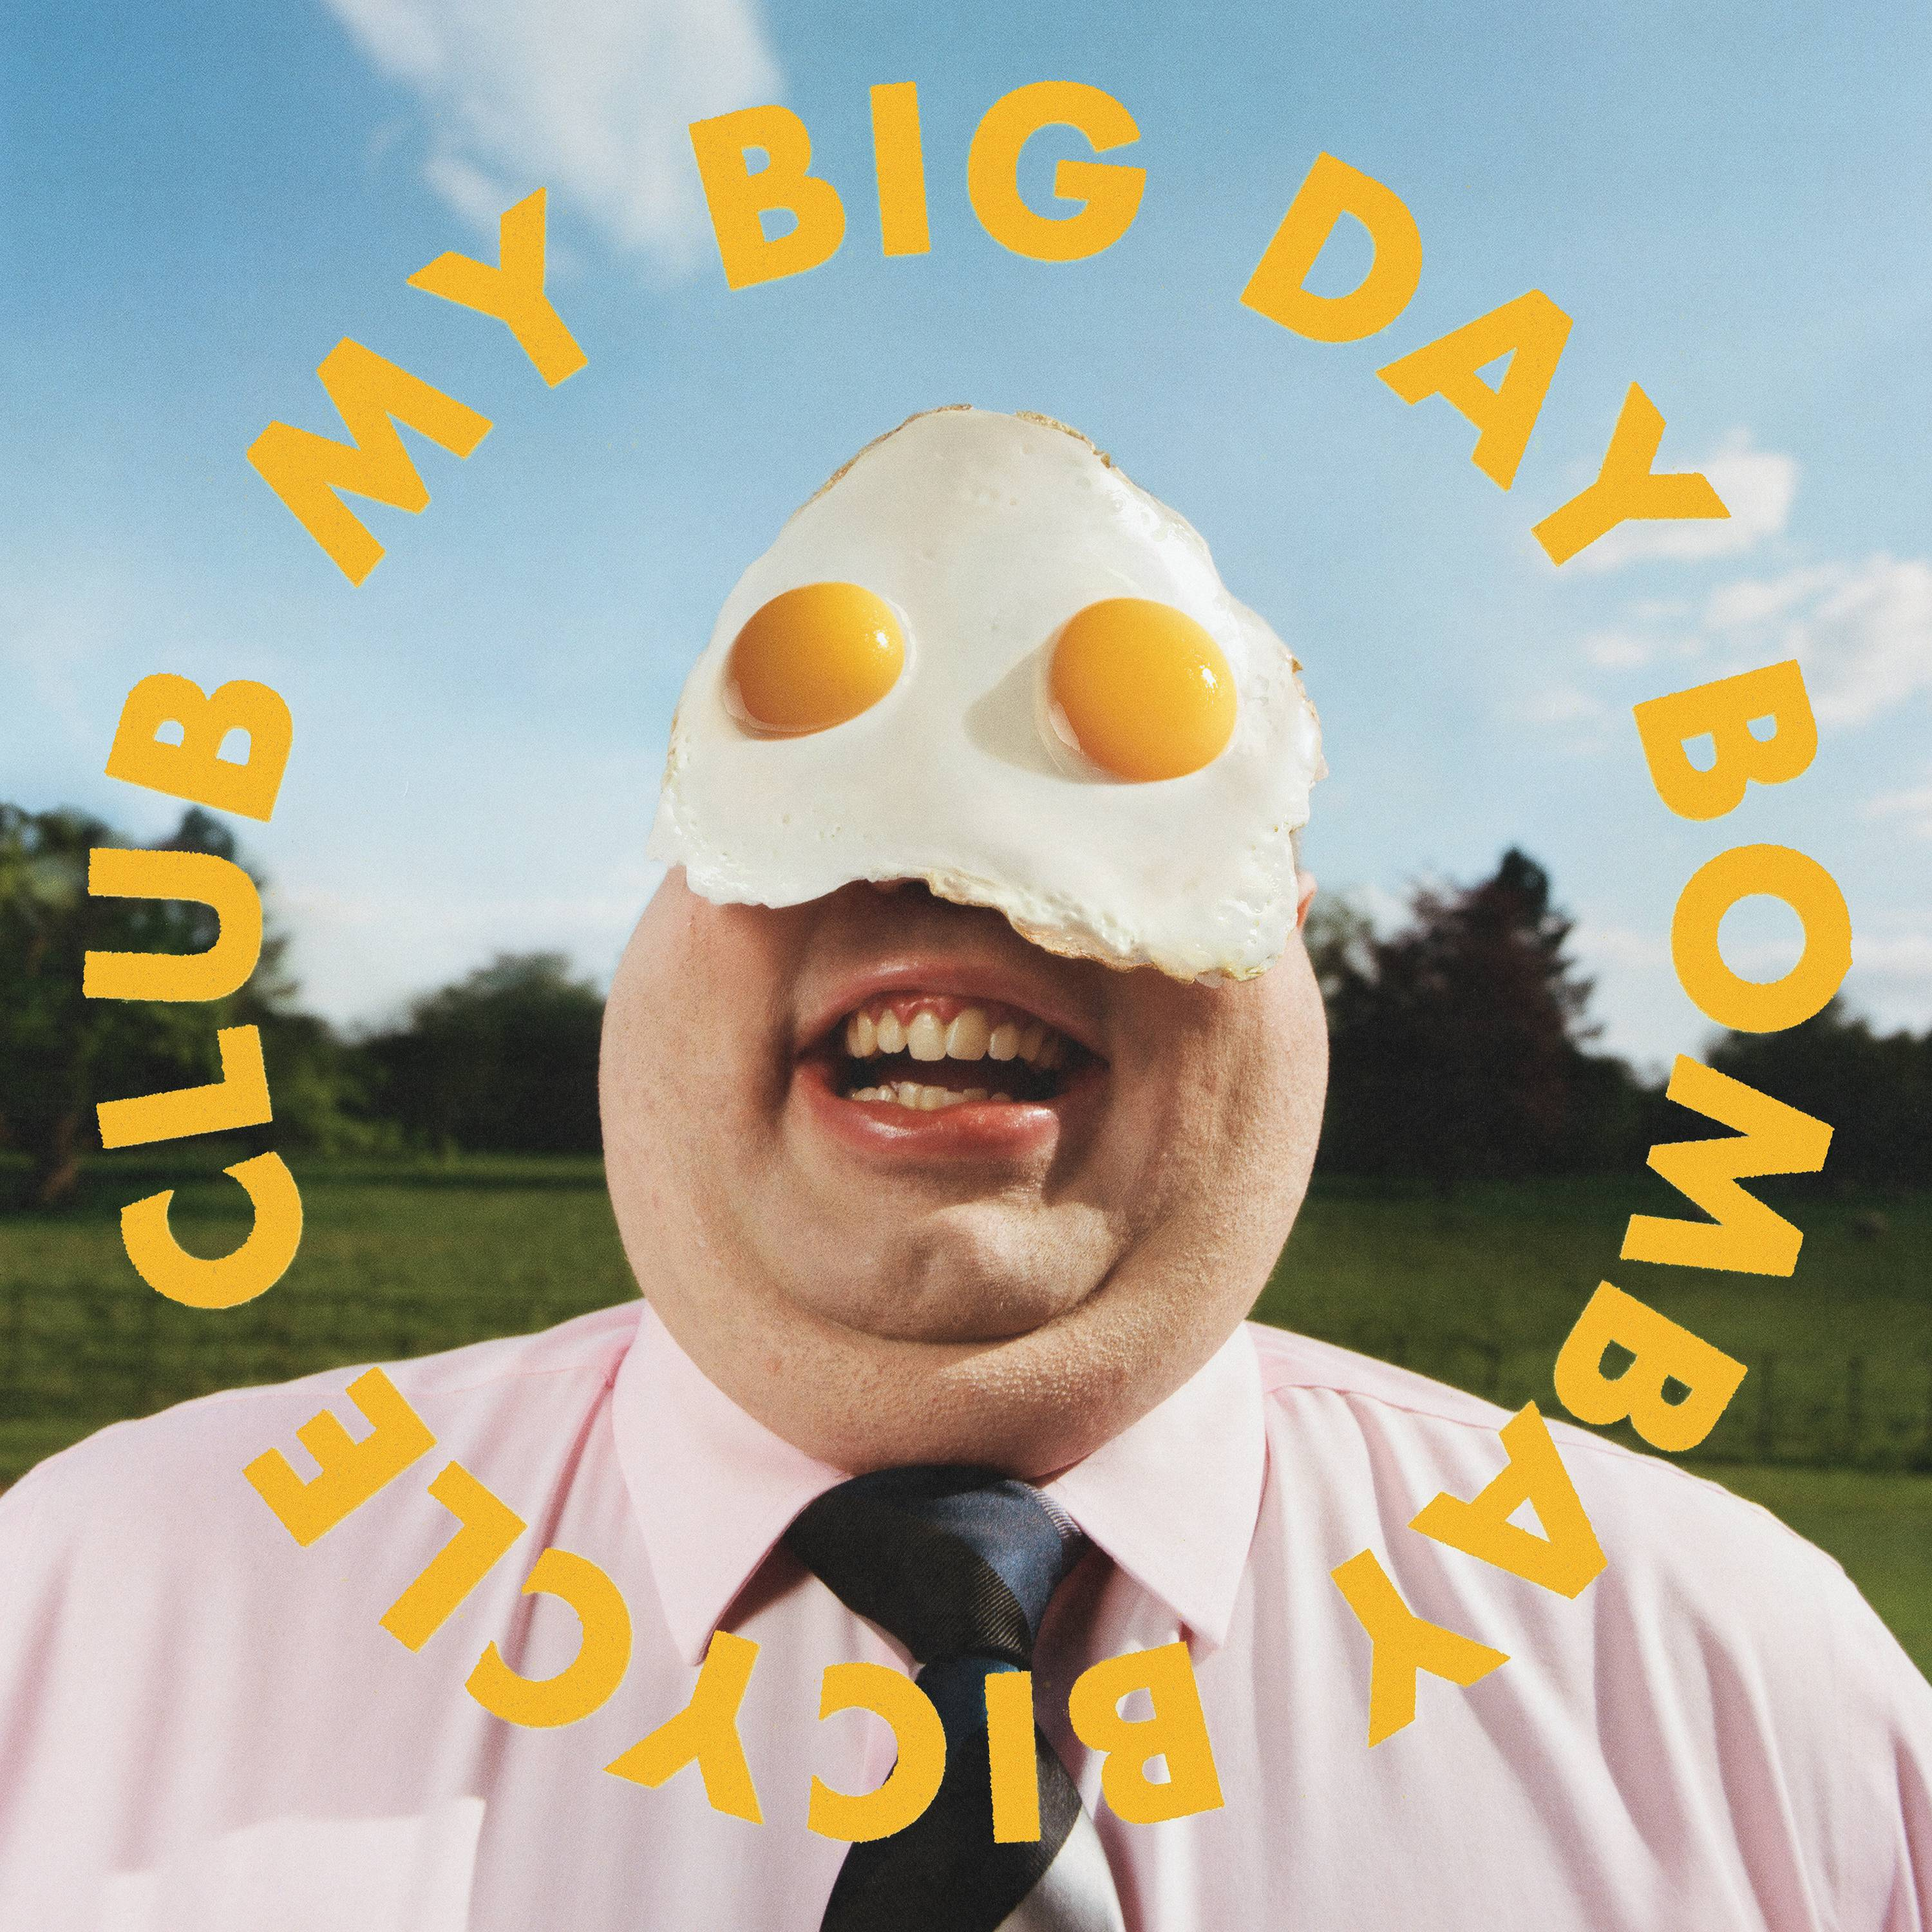 Bombay Bicycle Club My Big Day Zip Download